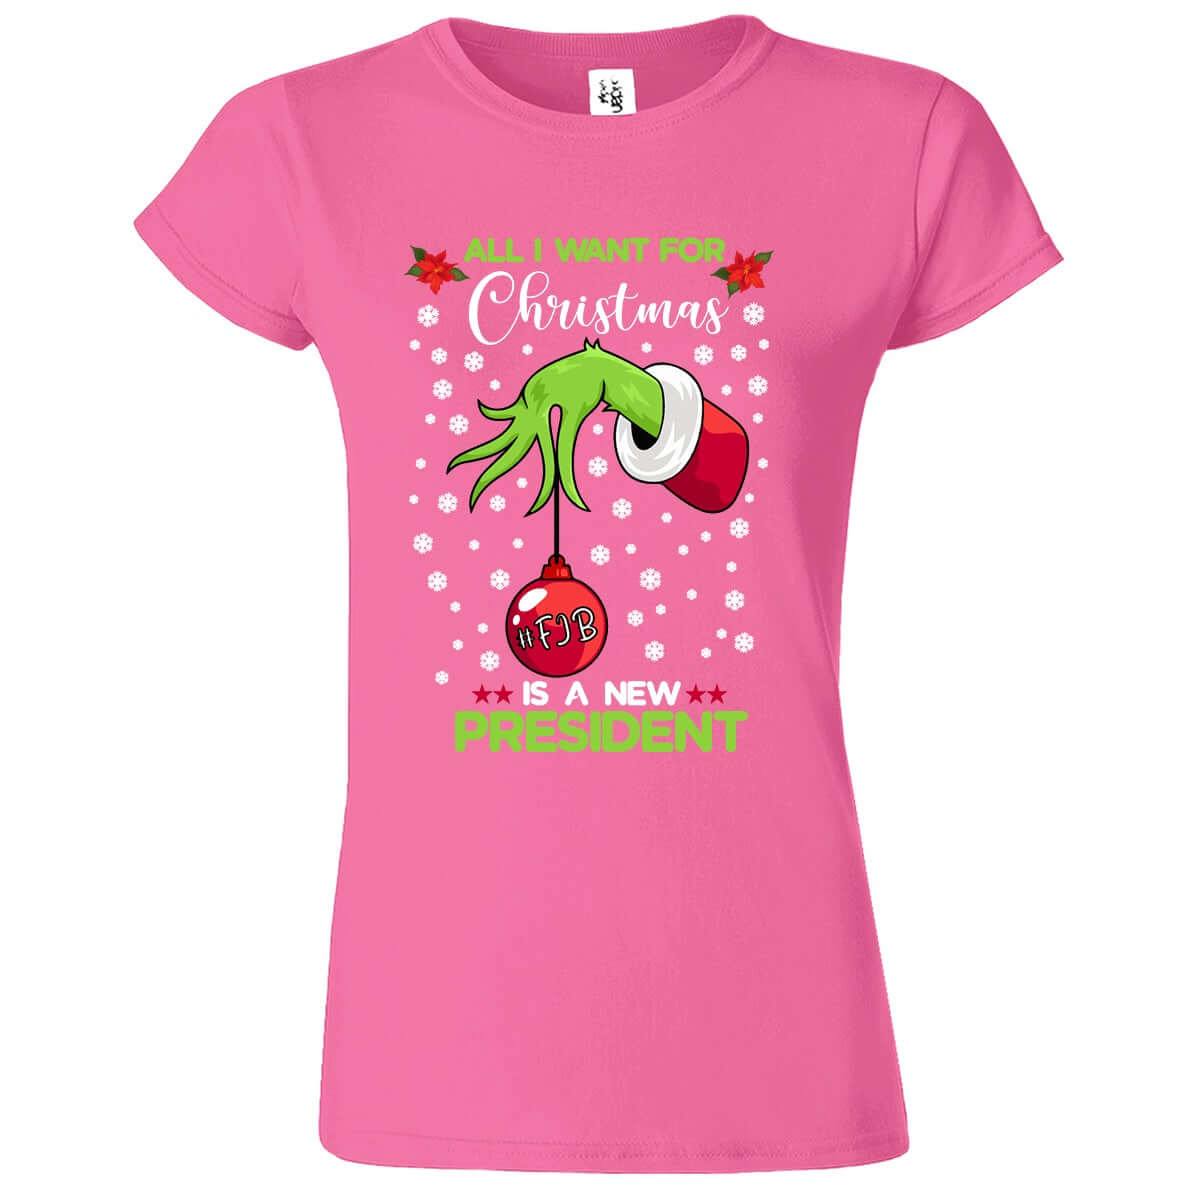 All I Want Christmas Hanging Ball Womens T-Shirt - ApparelinClick